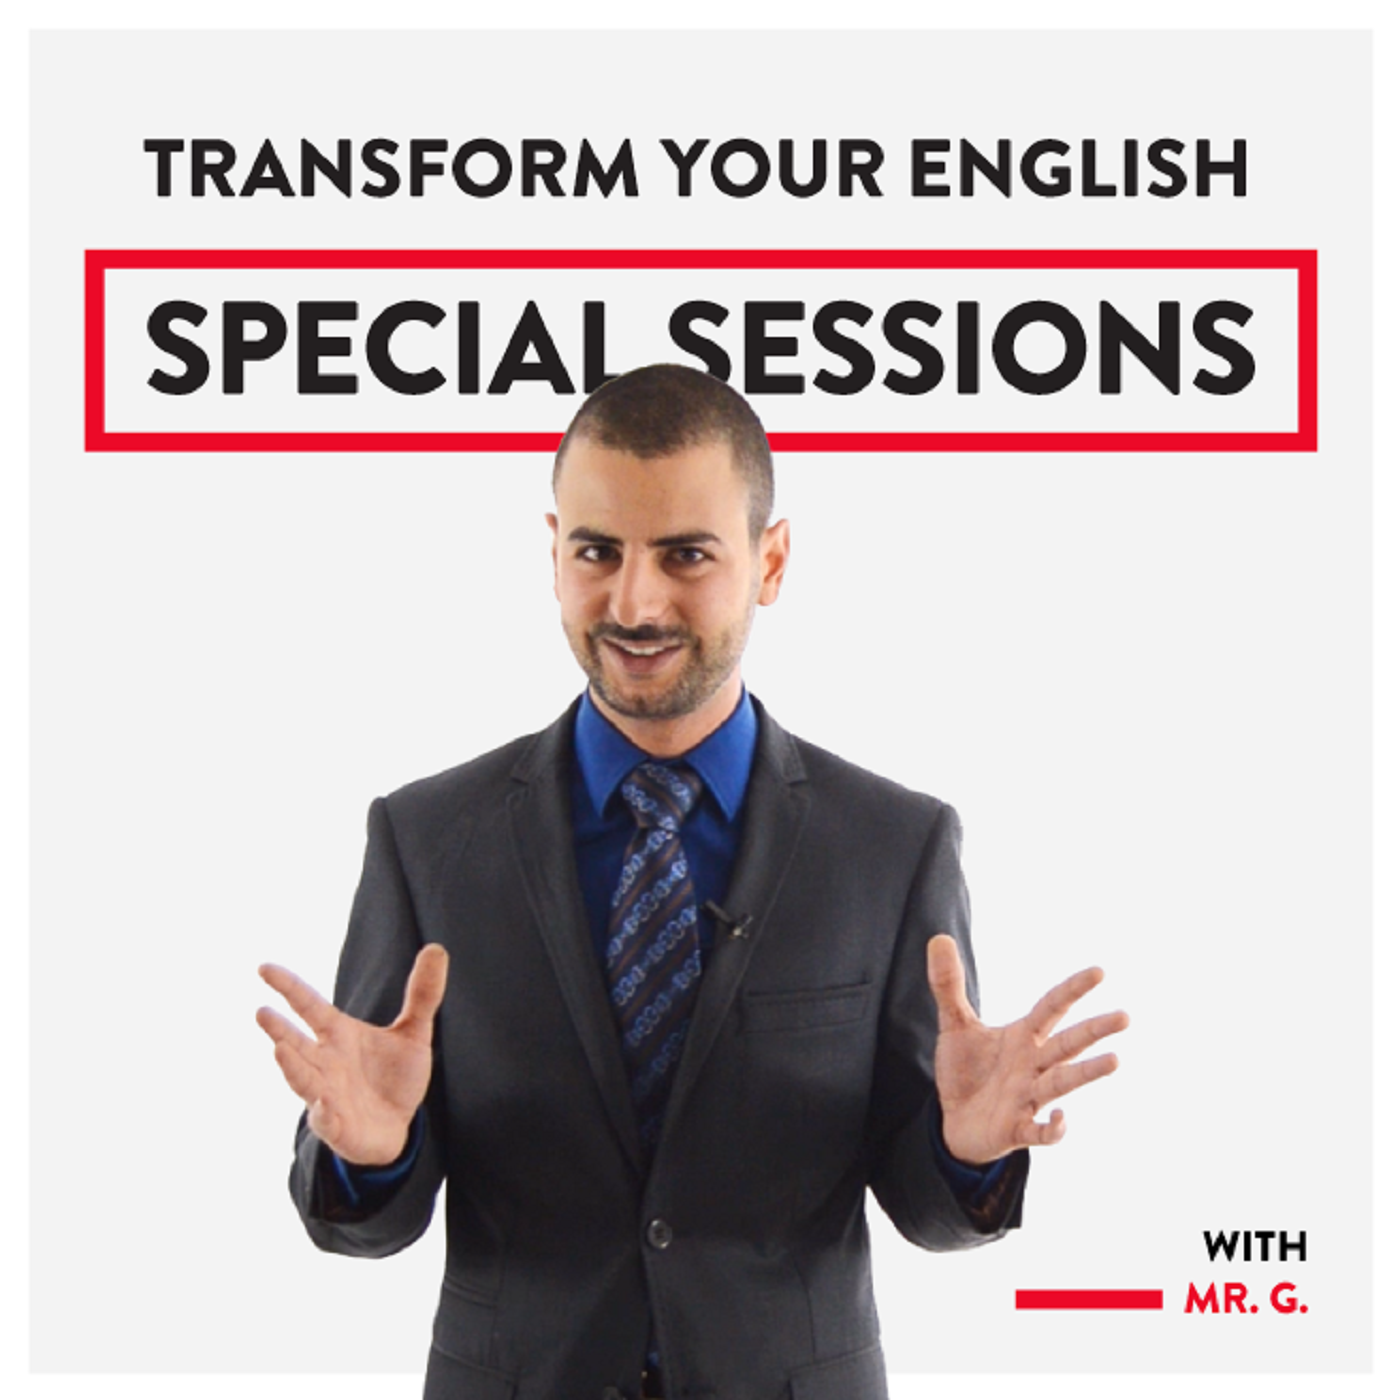 Transform Your English special sessions